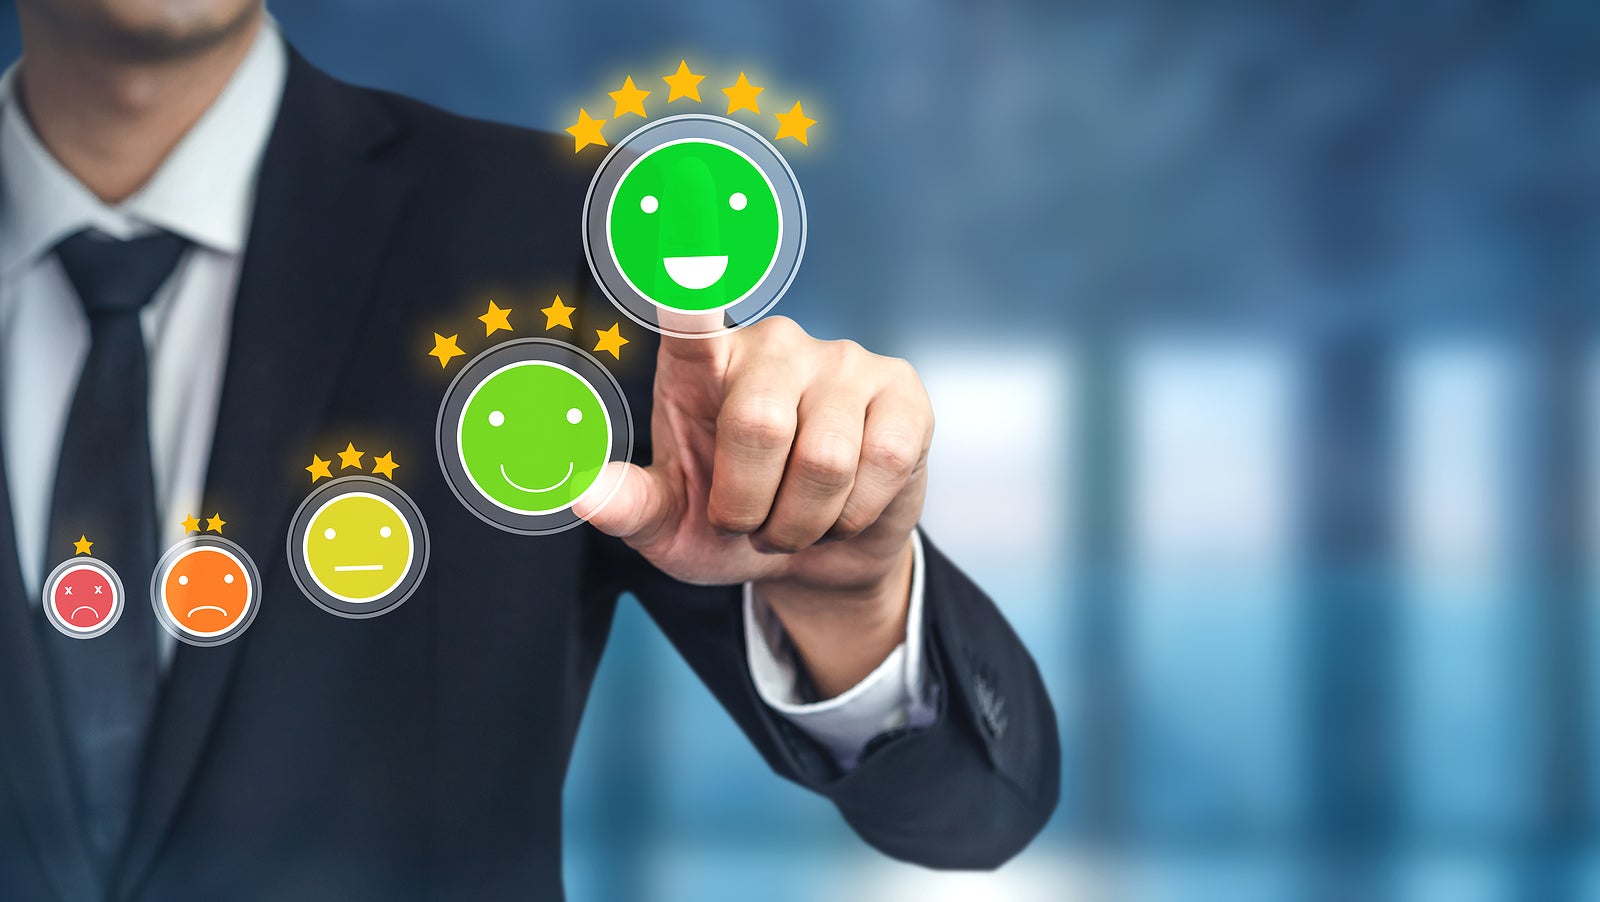 How to Get Ratings and Reviews for Your Small Business